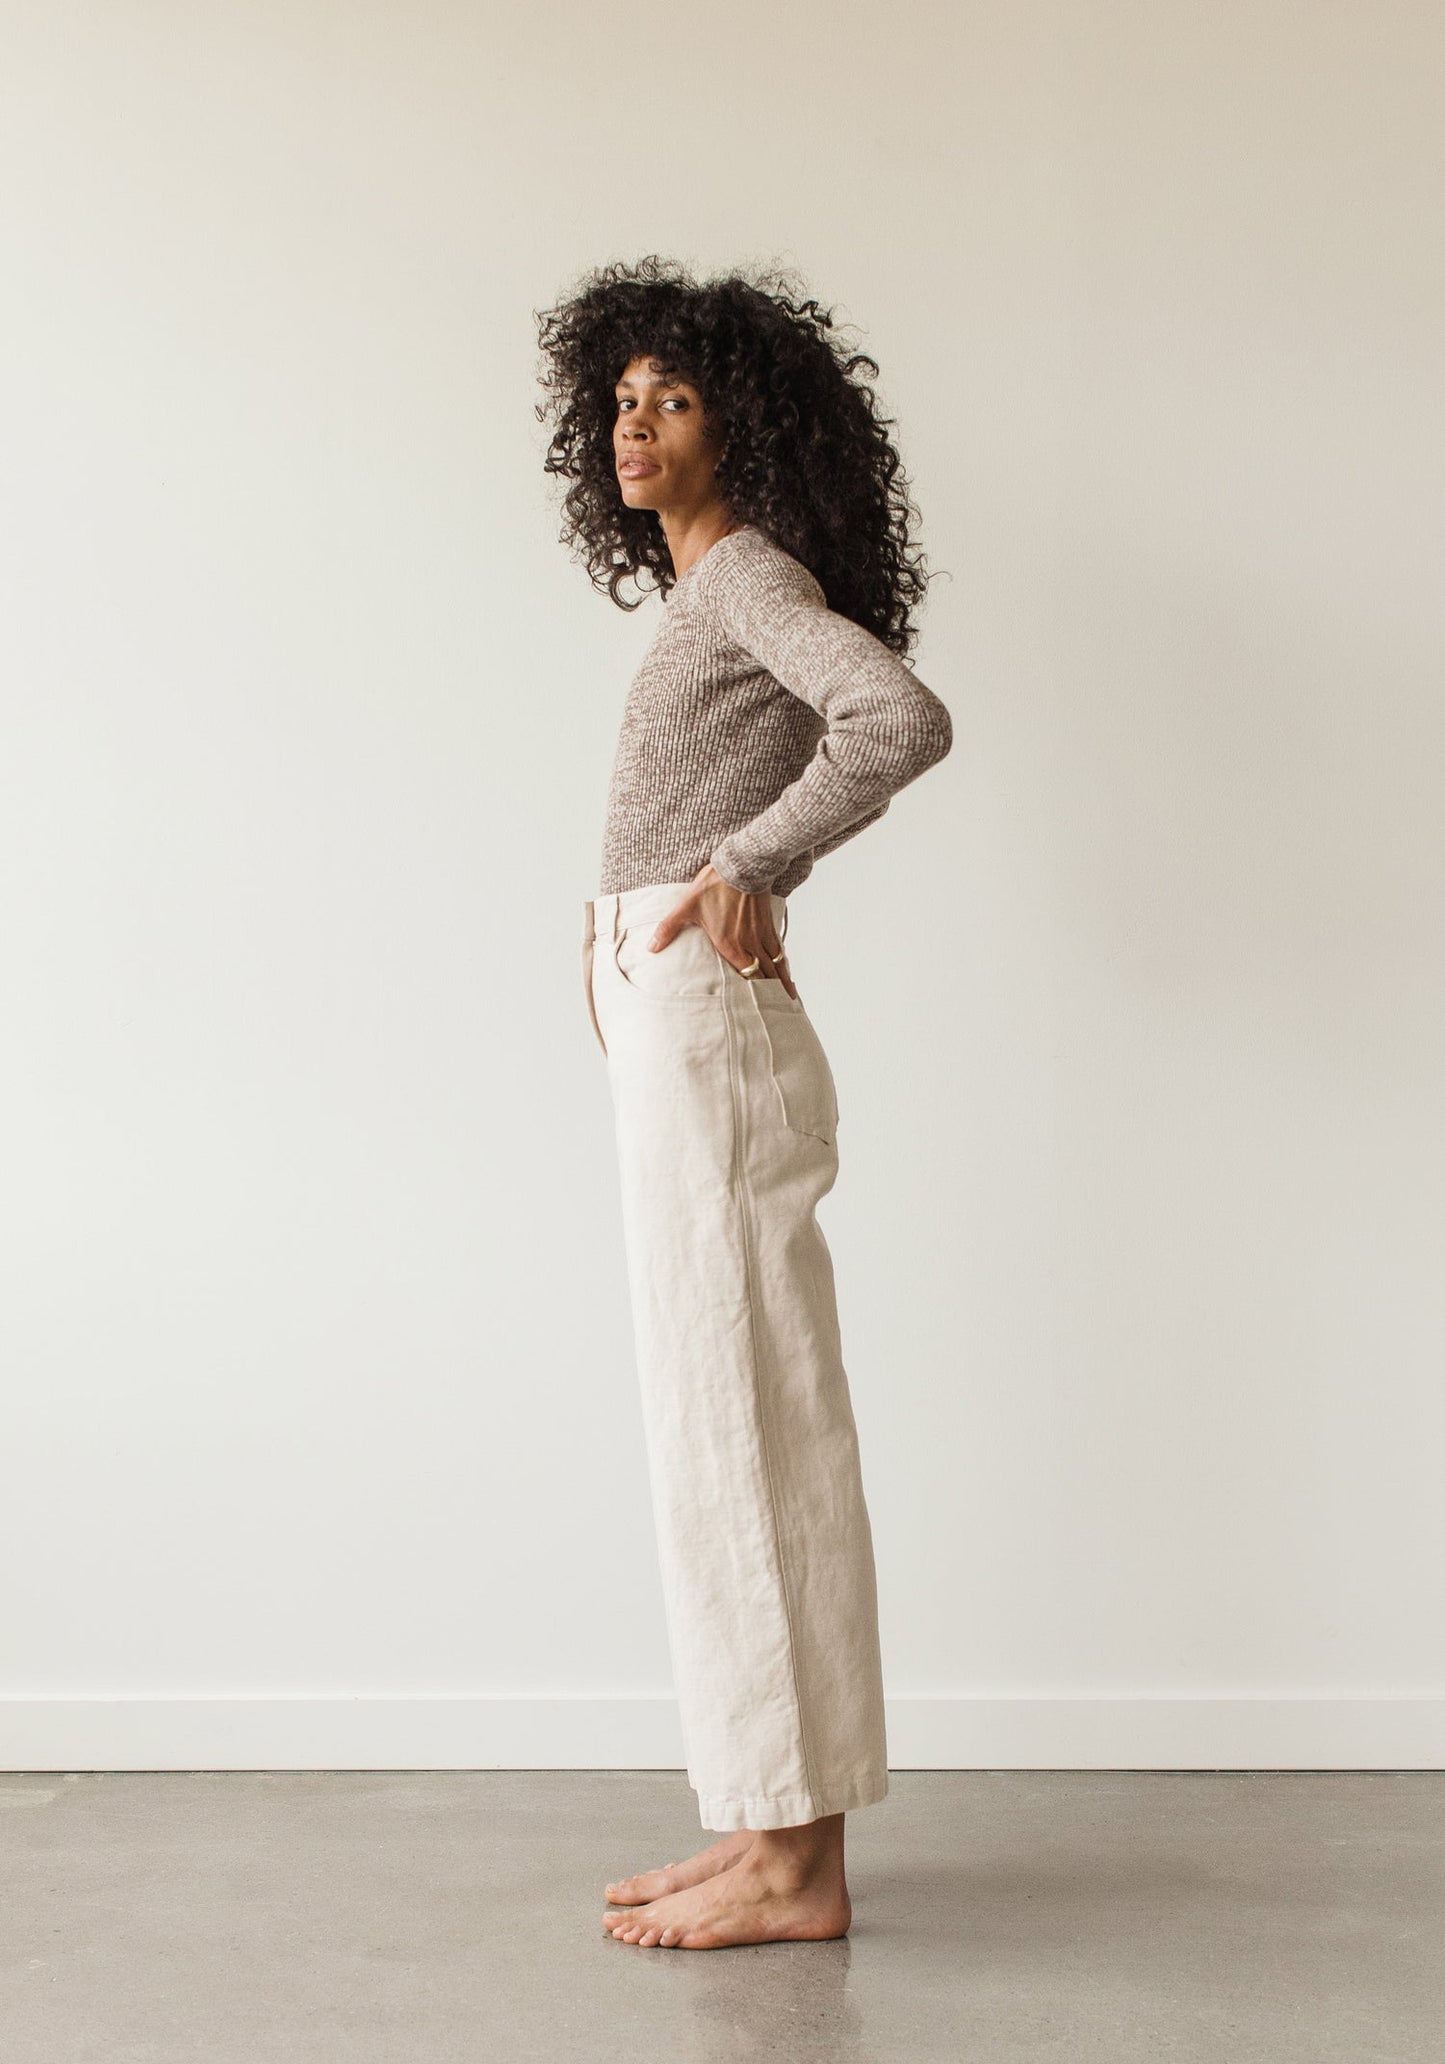 The new easy, everyday, go with anything trouser. Designed with a flattering high rise that is fitted through the hips and opens to a comfortable wide leg opening. Cut from an OEKO Tex Certified linen/cotton blend canvas twill, equal parts structure and comfort. First Rite sold at Thread Spun.